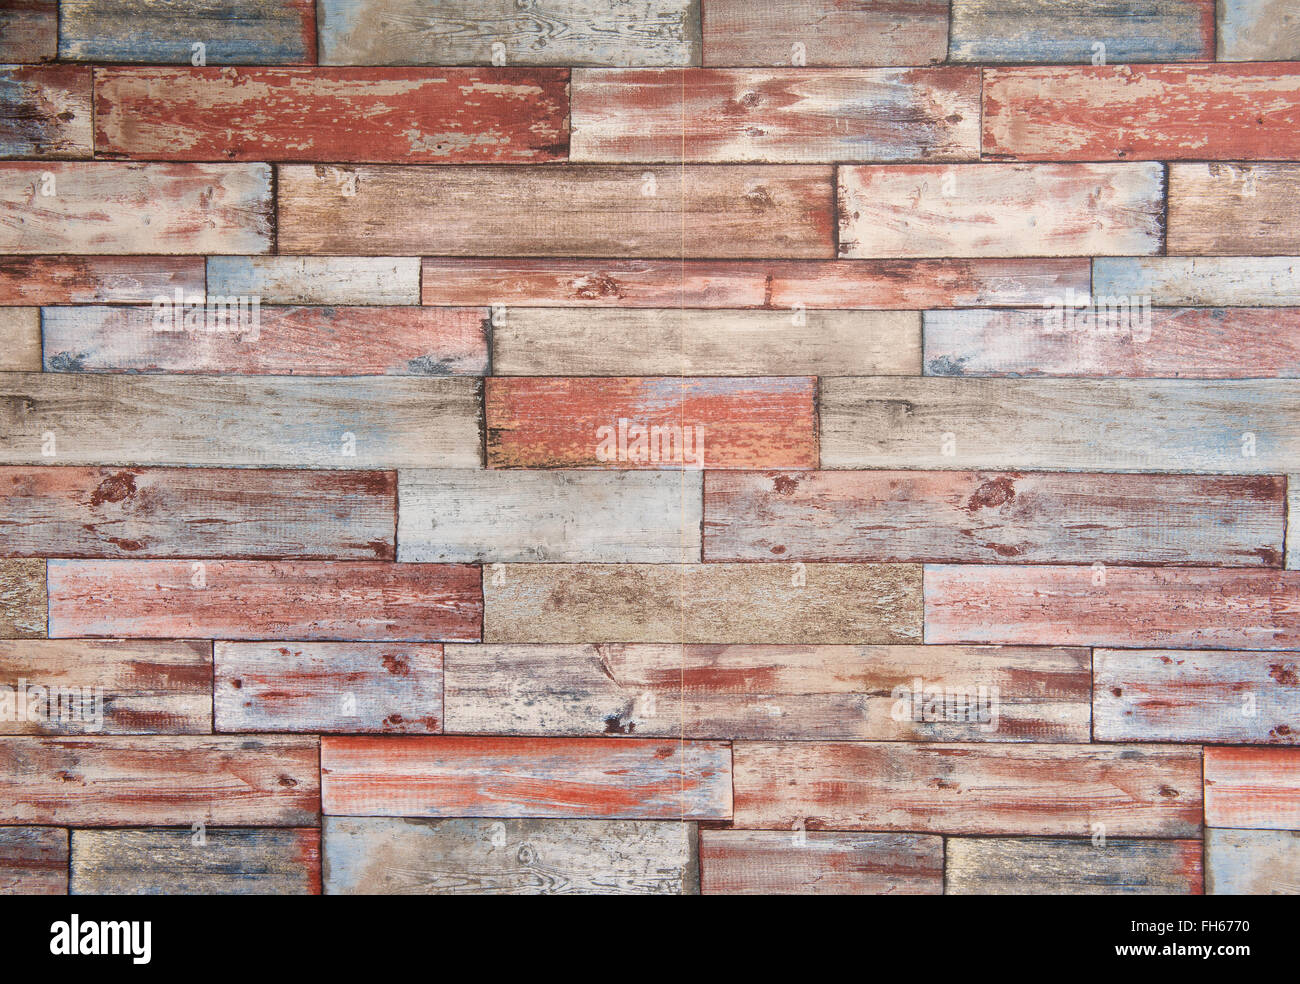 Horizontal frame of colorful brick  wall background with red blue and wooden look Stock Photo